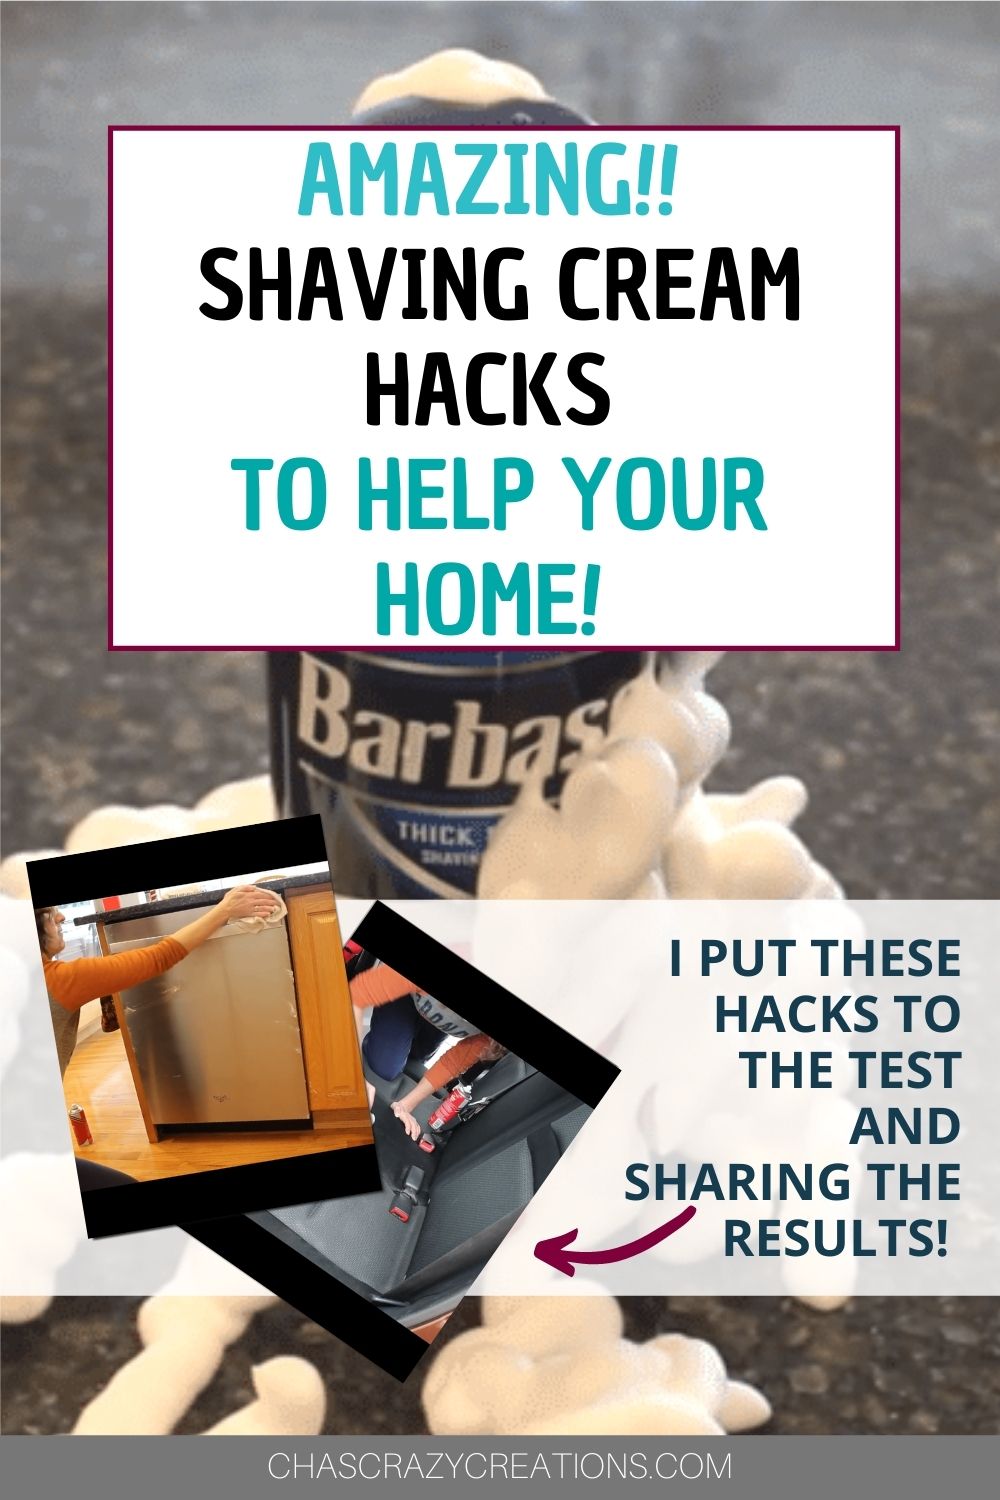 There are a lot of shaving cream hacks out there, and I have put some of those to the test and tried some of my own.